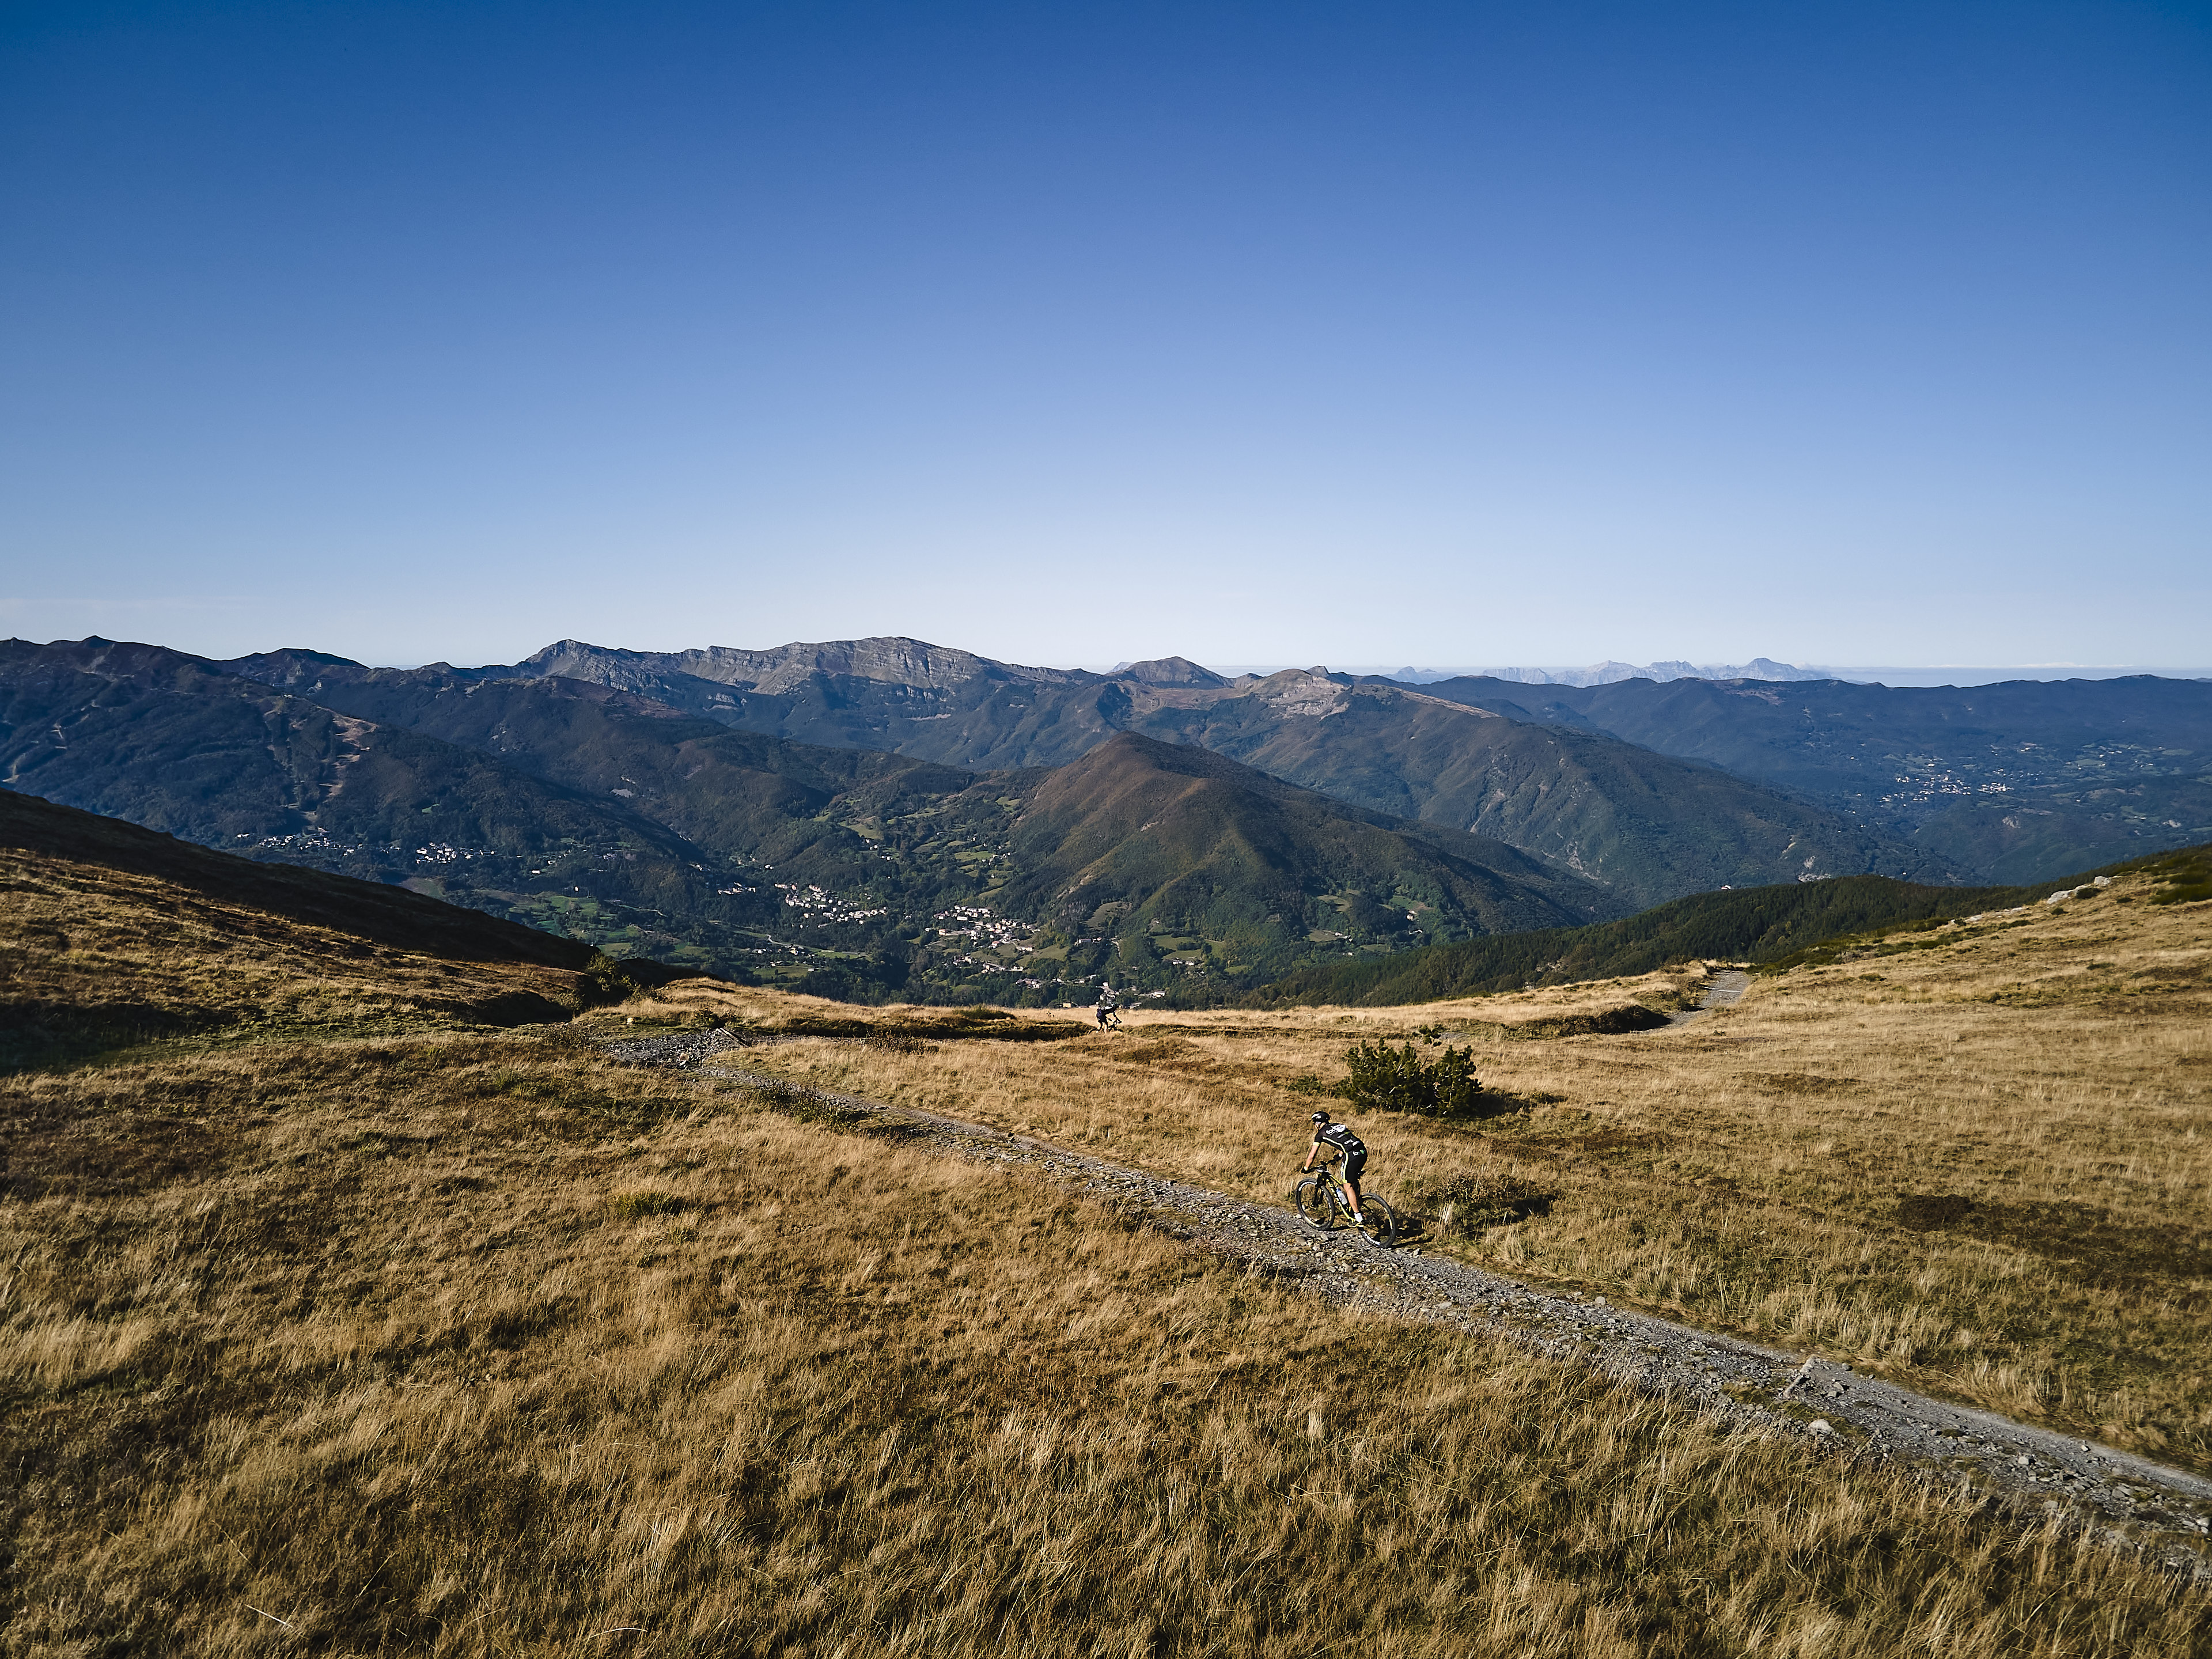 Appenninica and Emilia-Romagna together to relaunch the Apennines